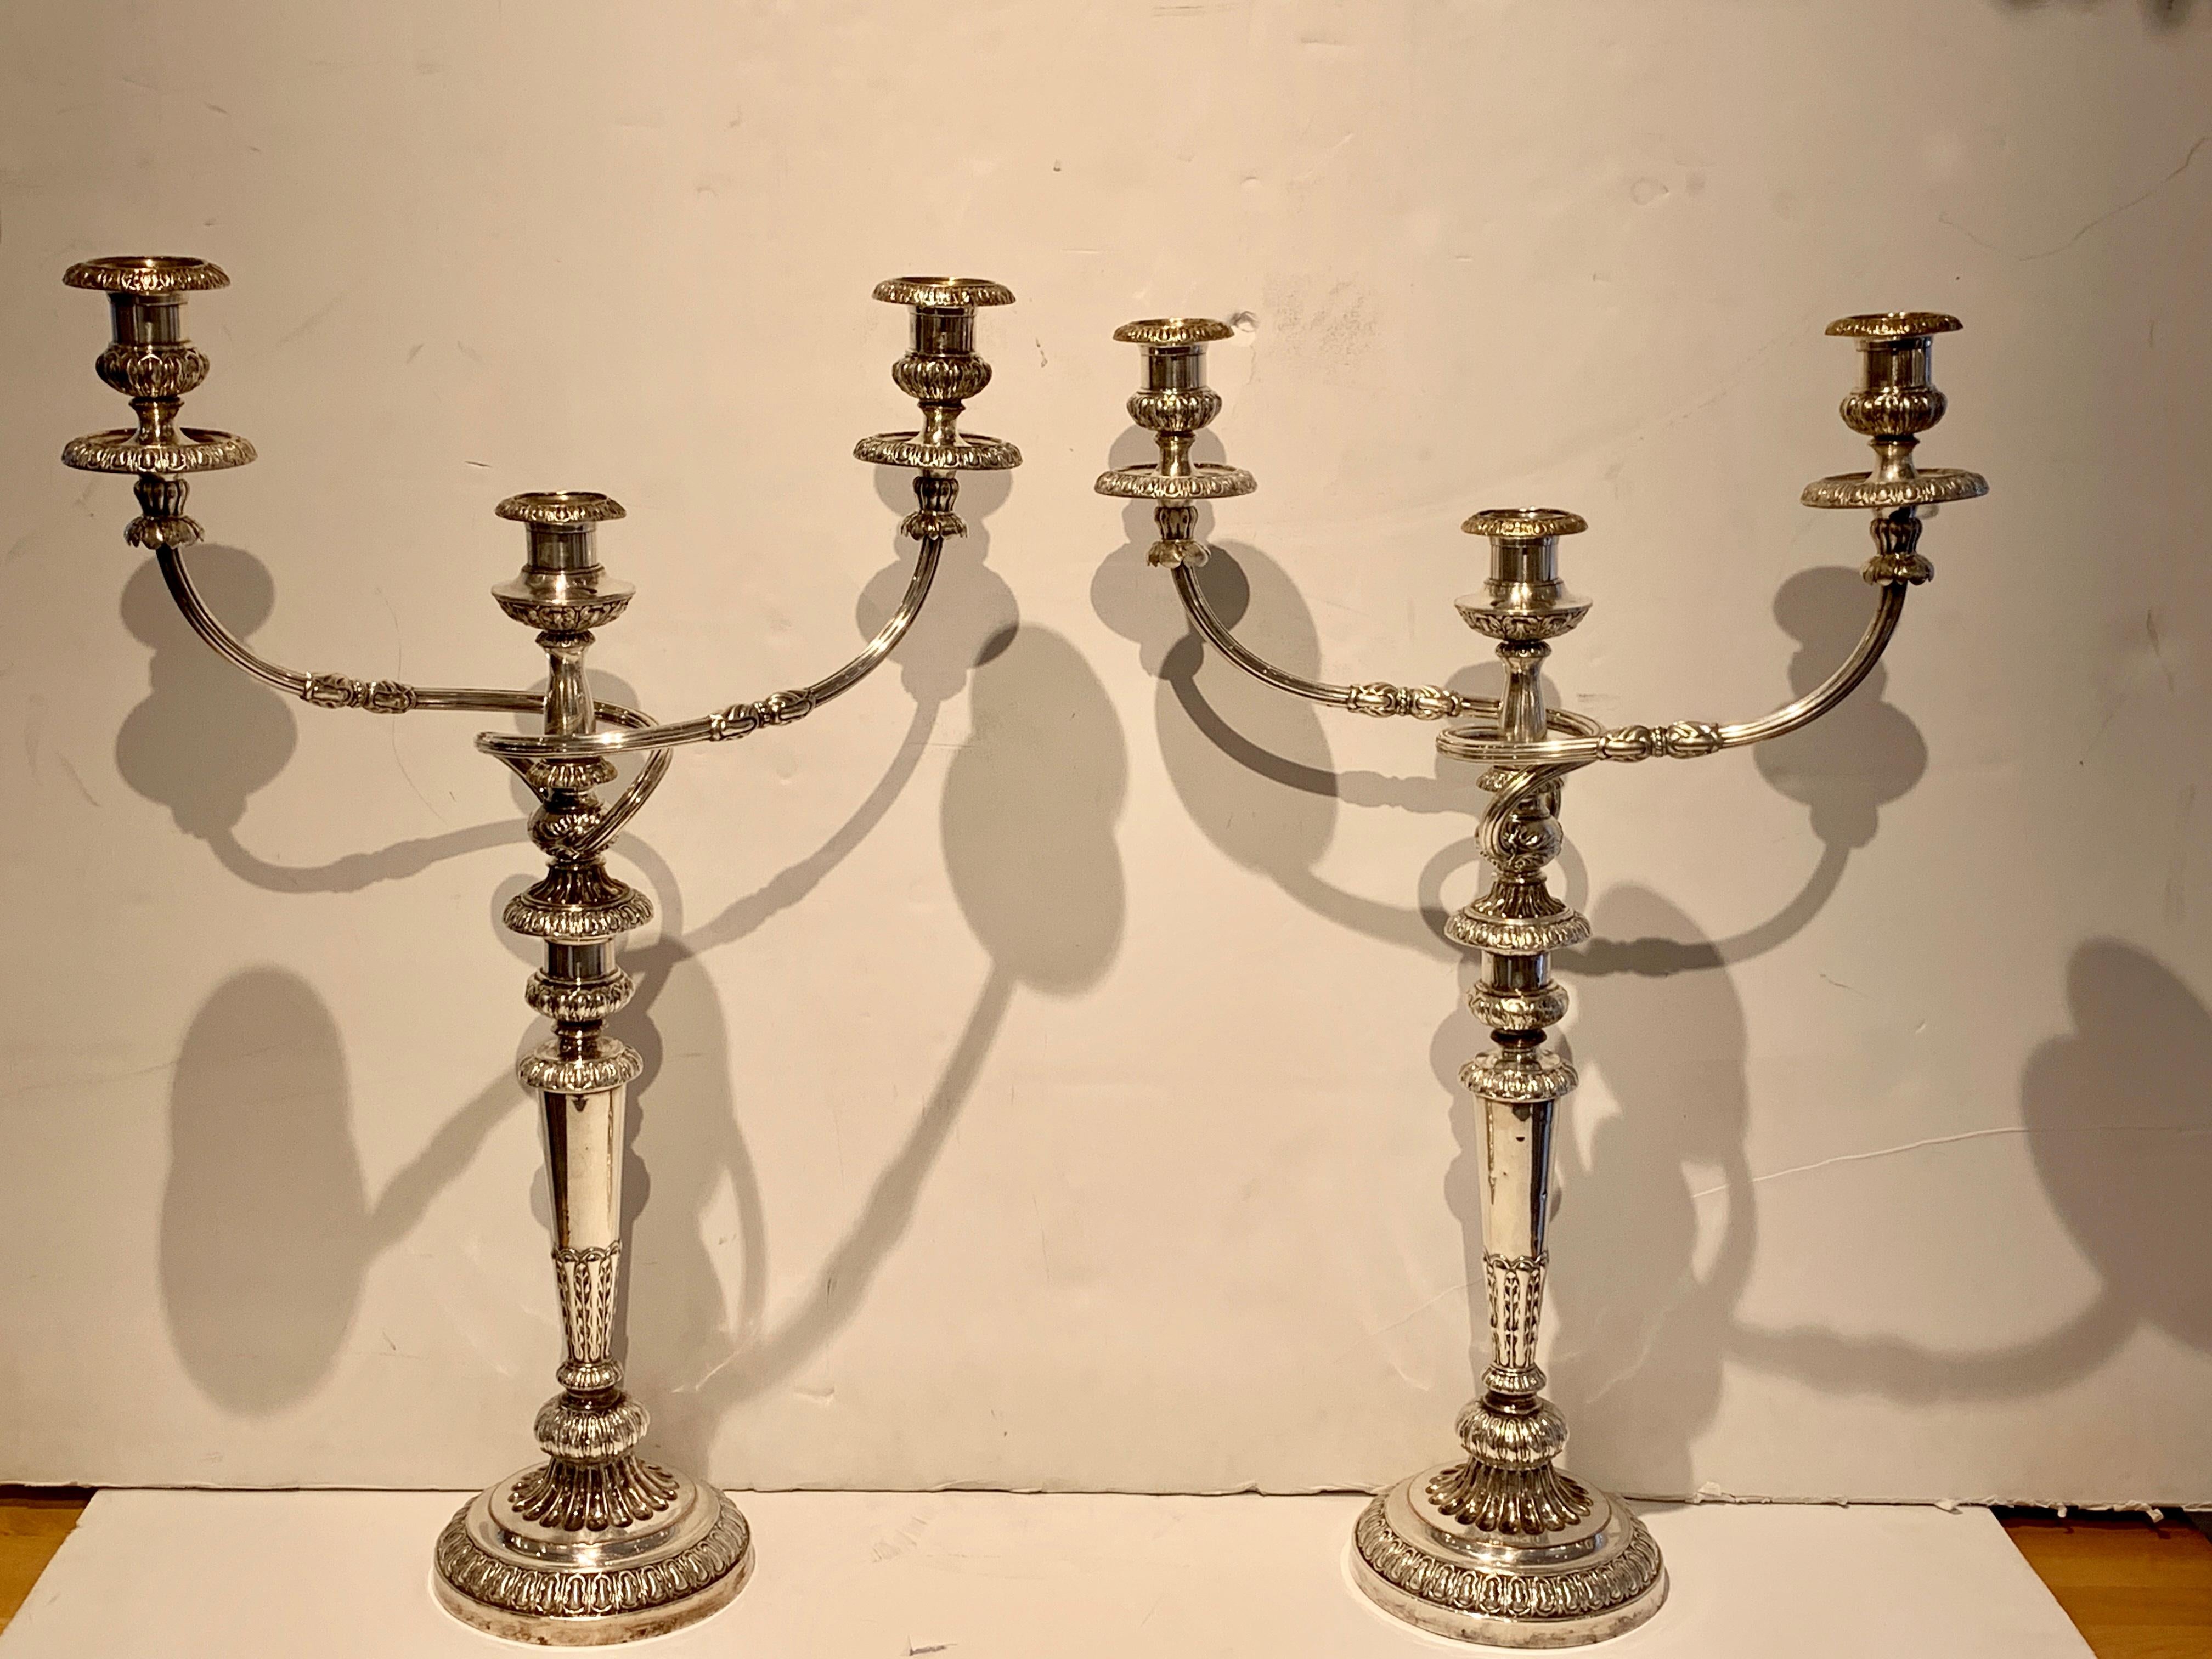 Elegant pair of old Sheffield plate candelabra, circa 1830, each one with removable three-light candelabra, fitted with bobeches, with two candle heights 22